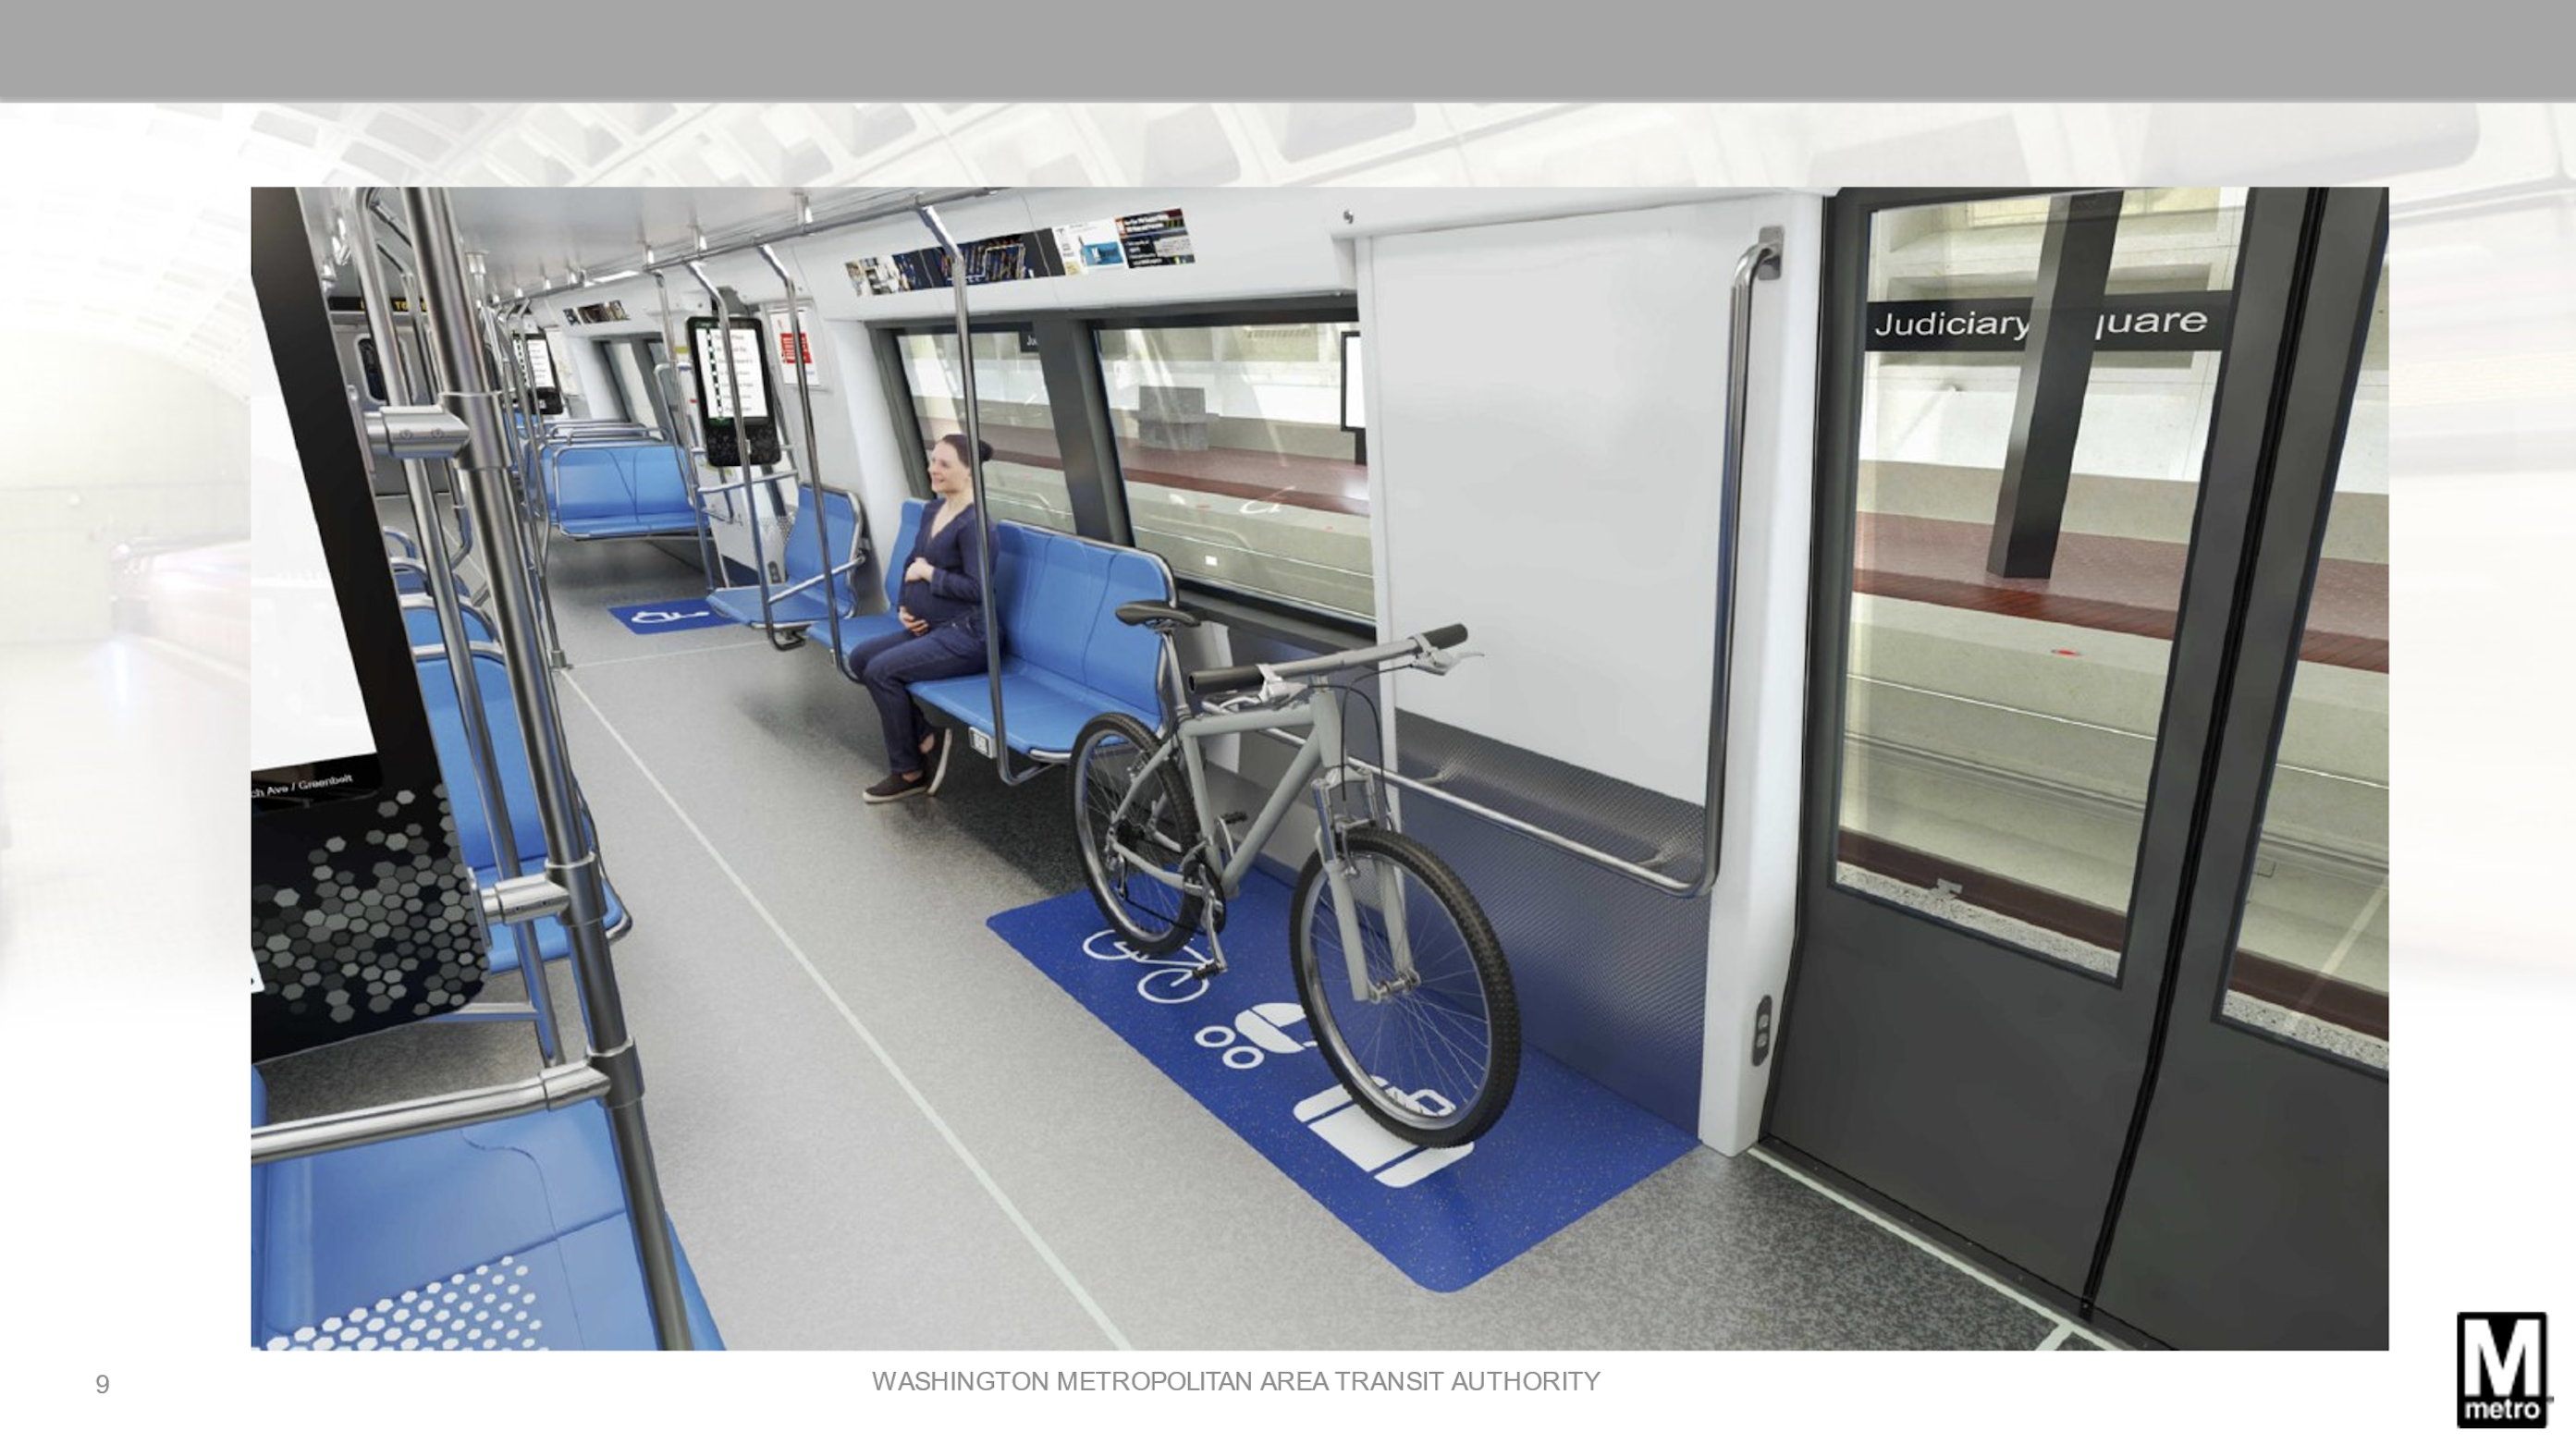 A rendering of the 8000 series train shows a dedicated spot near the railcar doors for a bicycle, stroller and luggage.